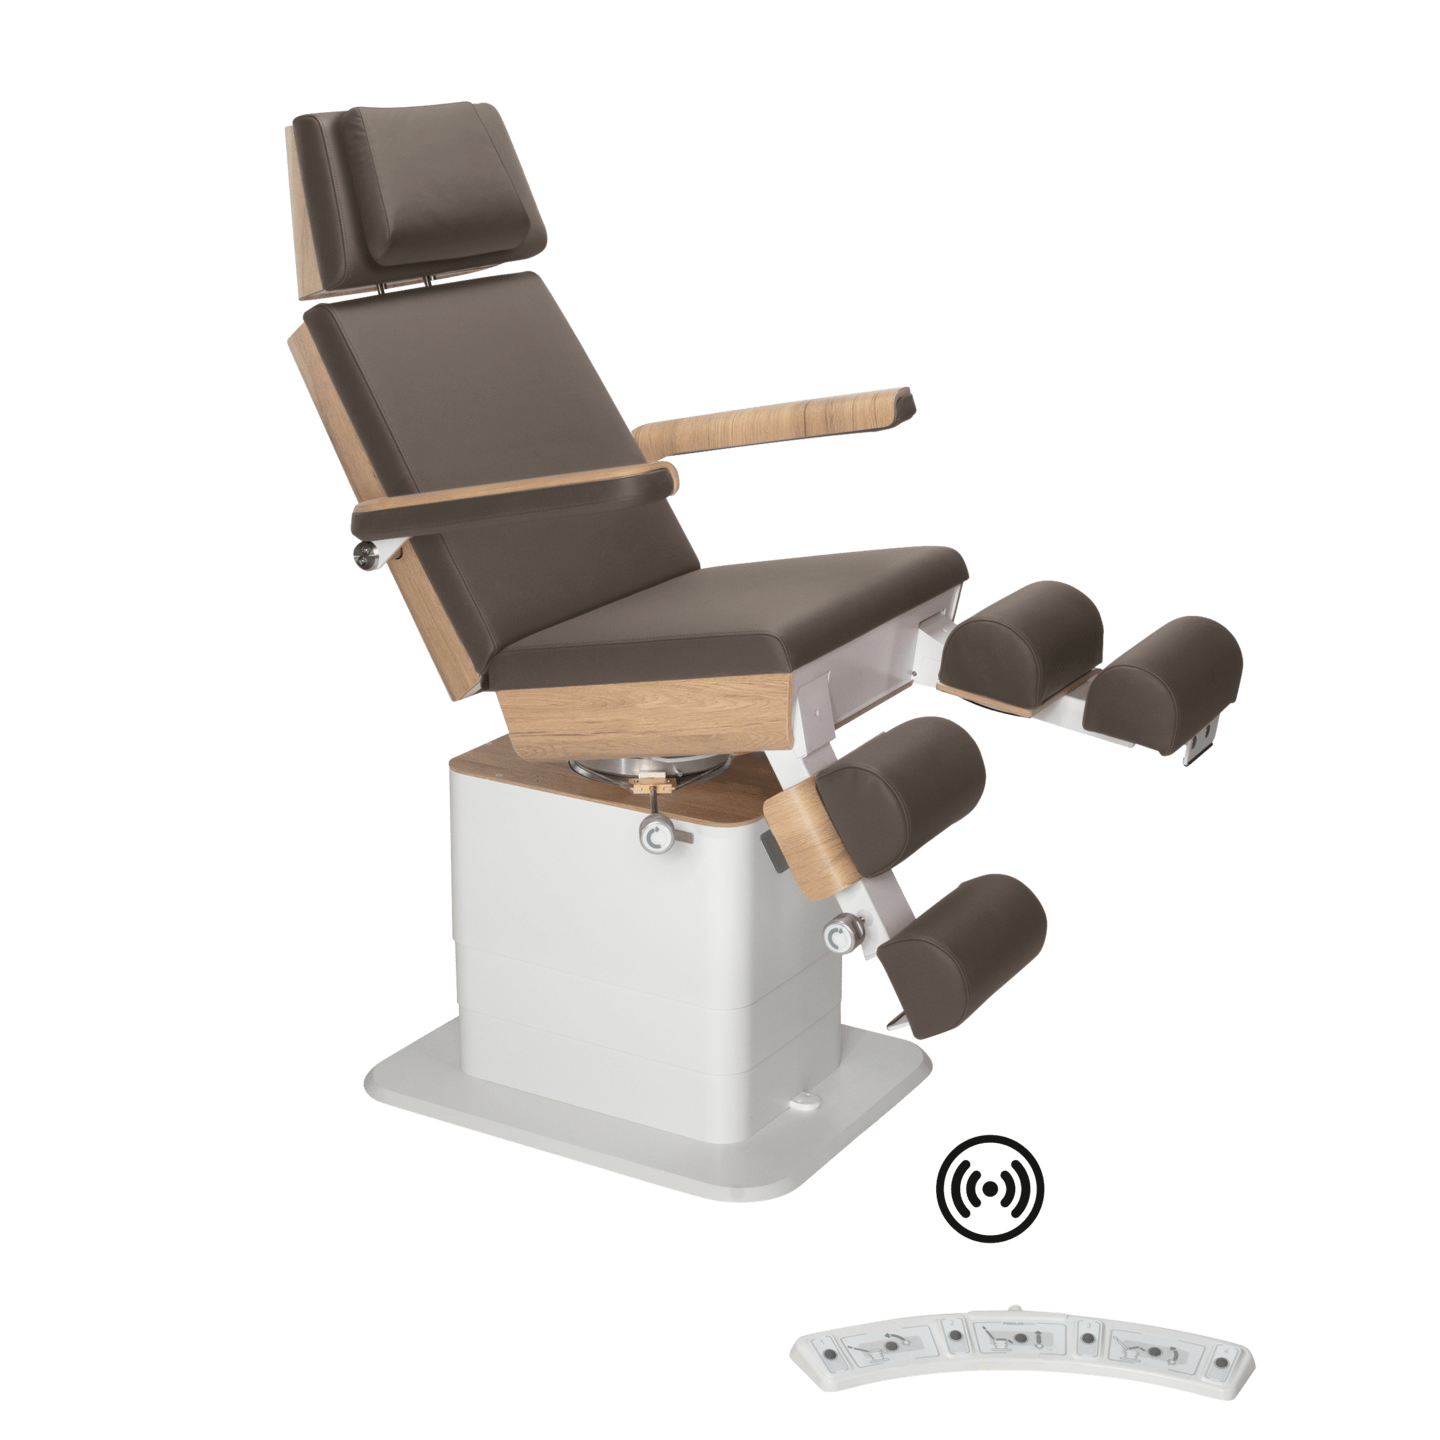 RUCK - MOON Podiatry Chair/Couch (with gas assisted leg sections) in espresso